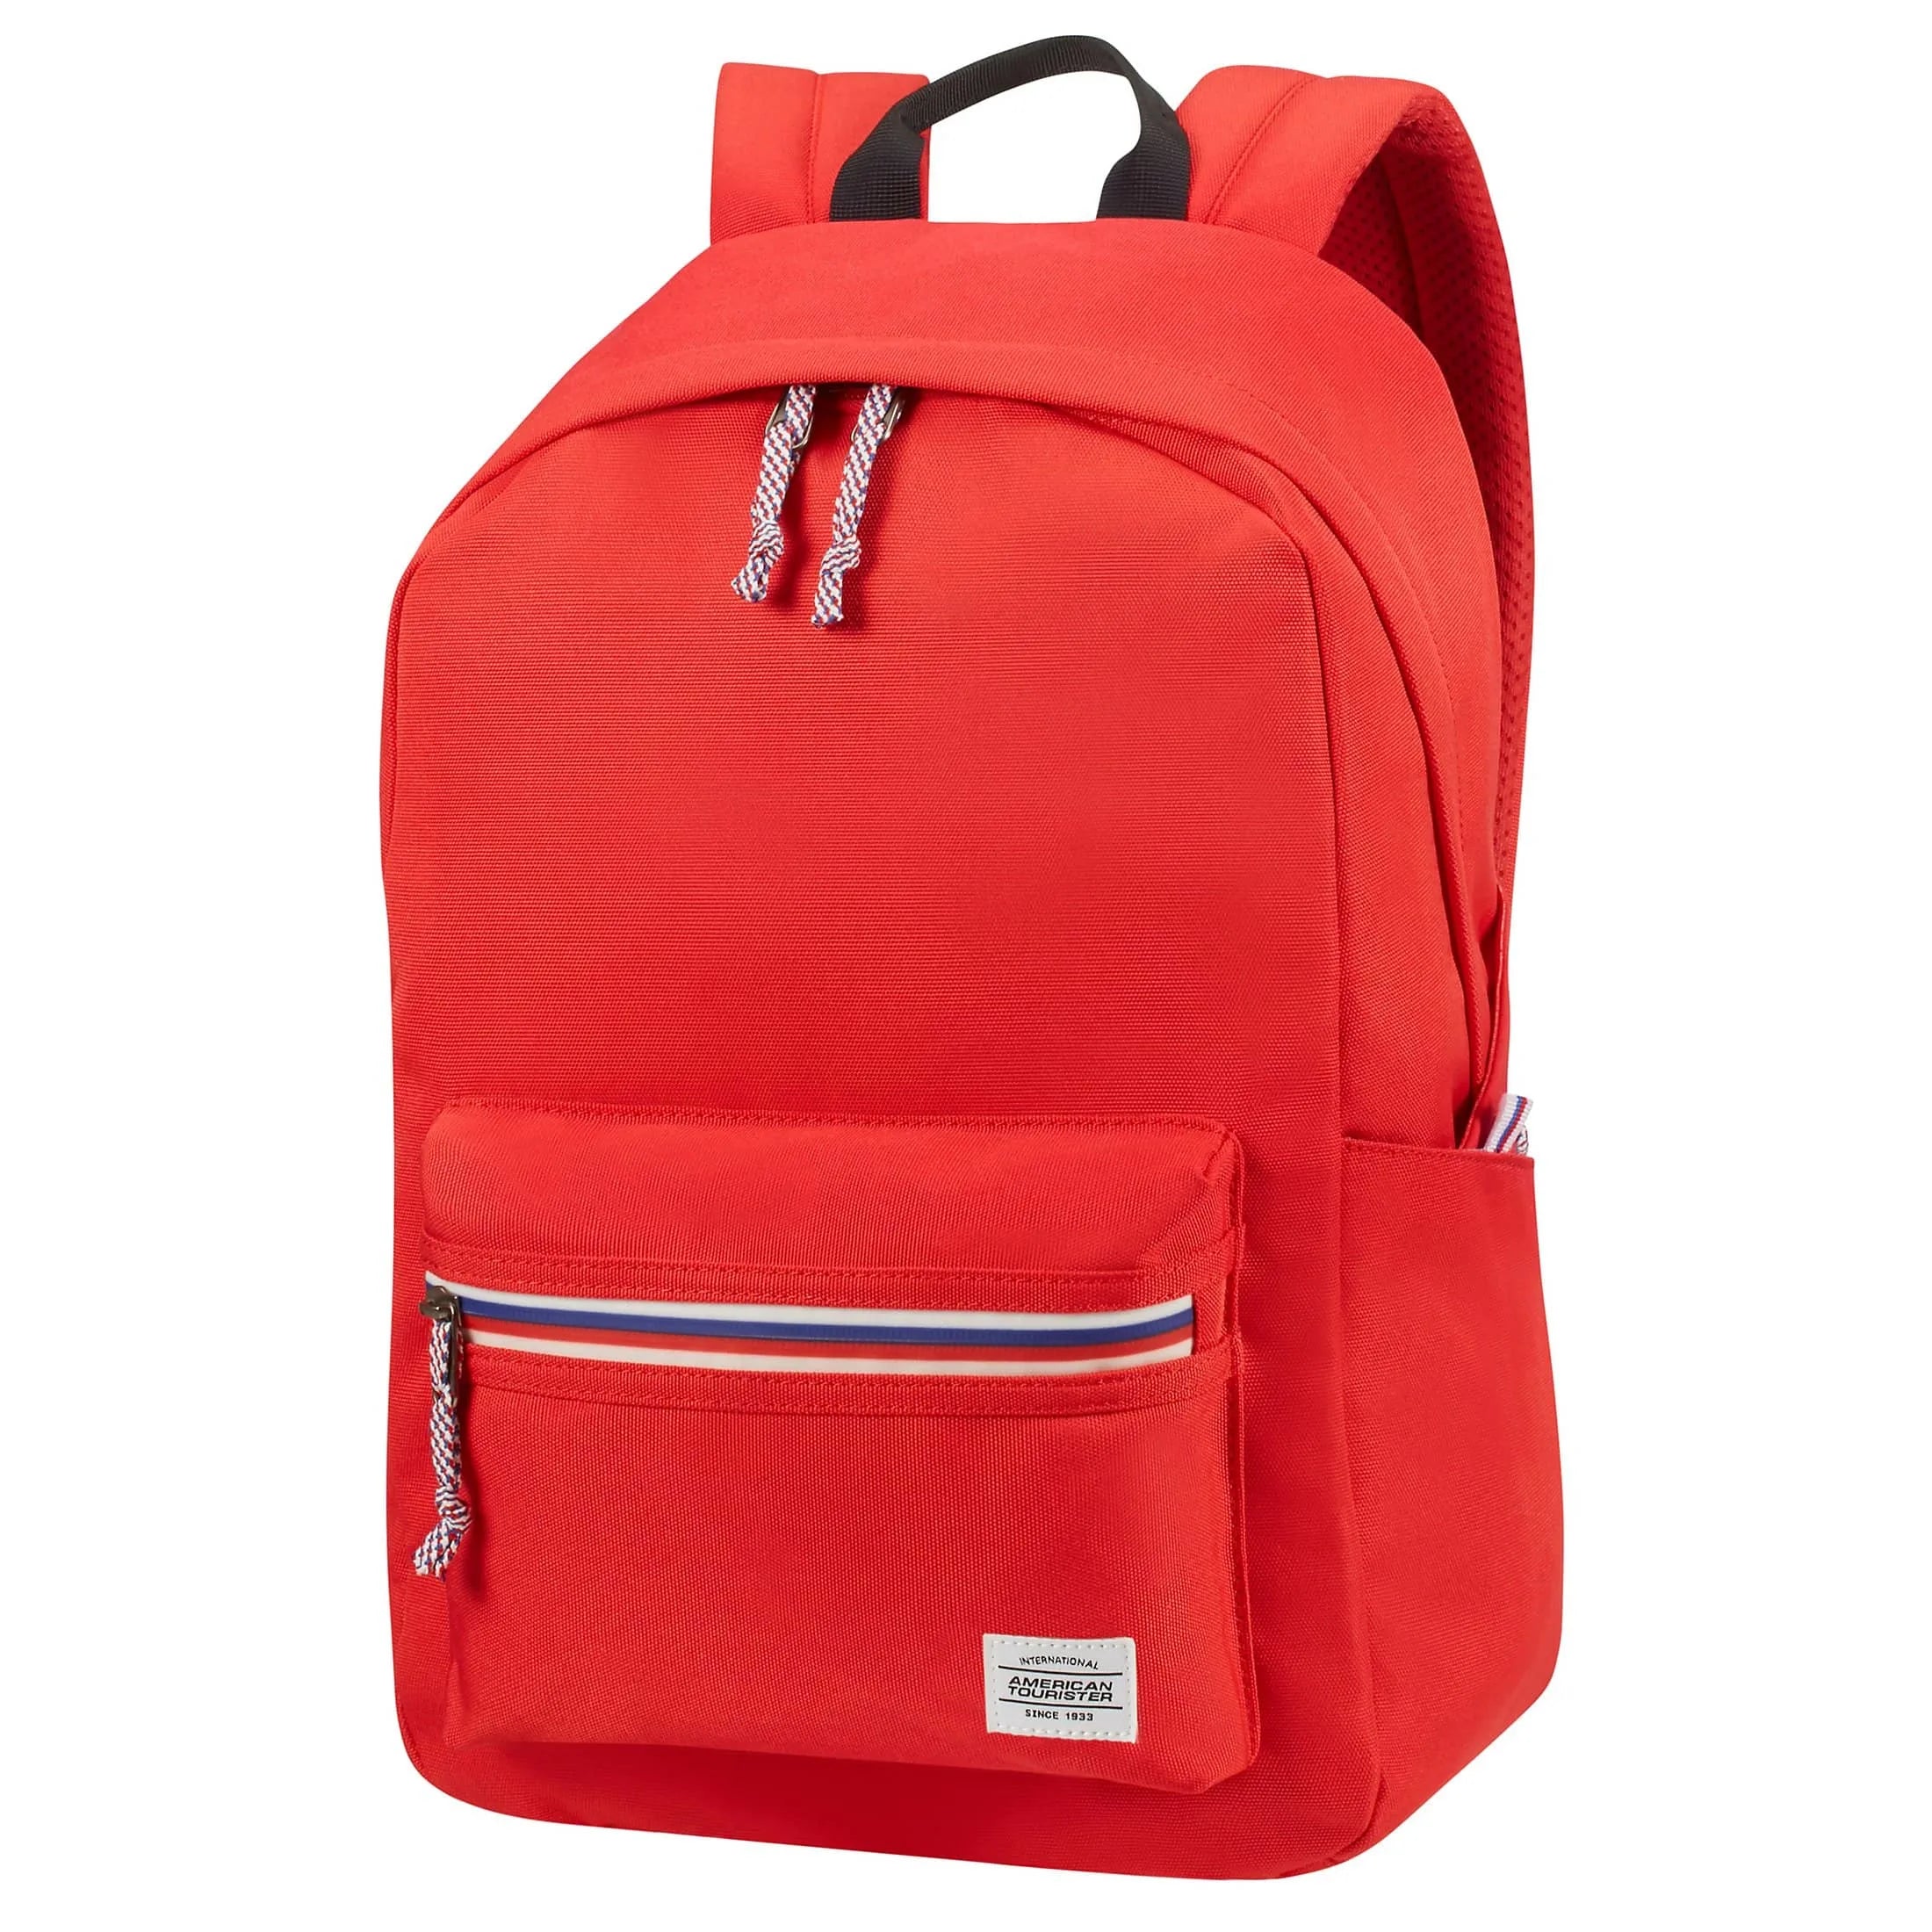 American Tourister Upbeat leisure backpack 42 cm - red